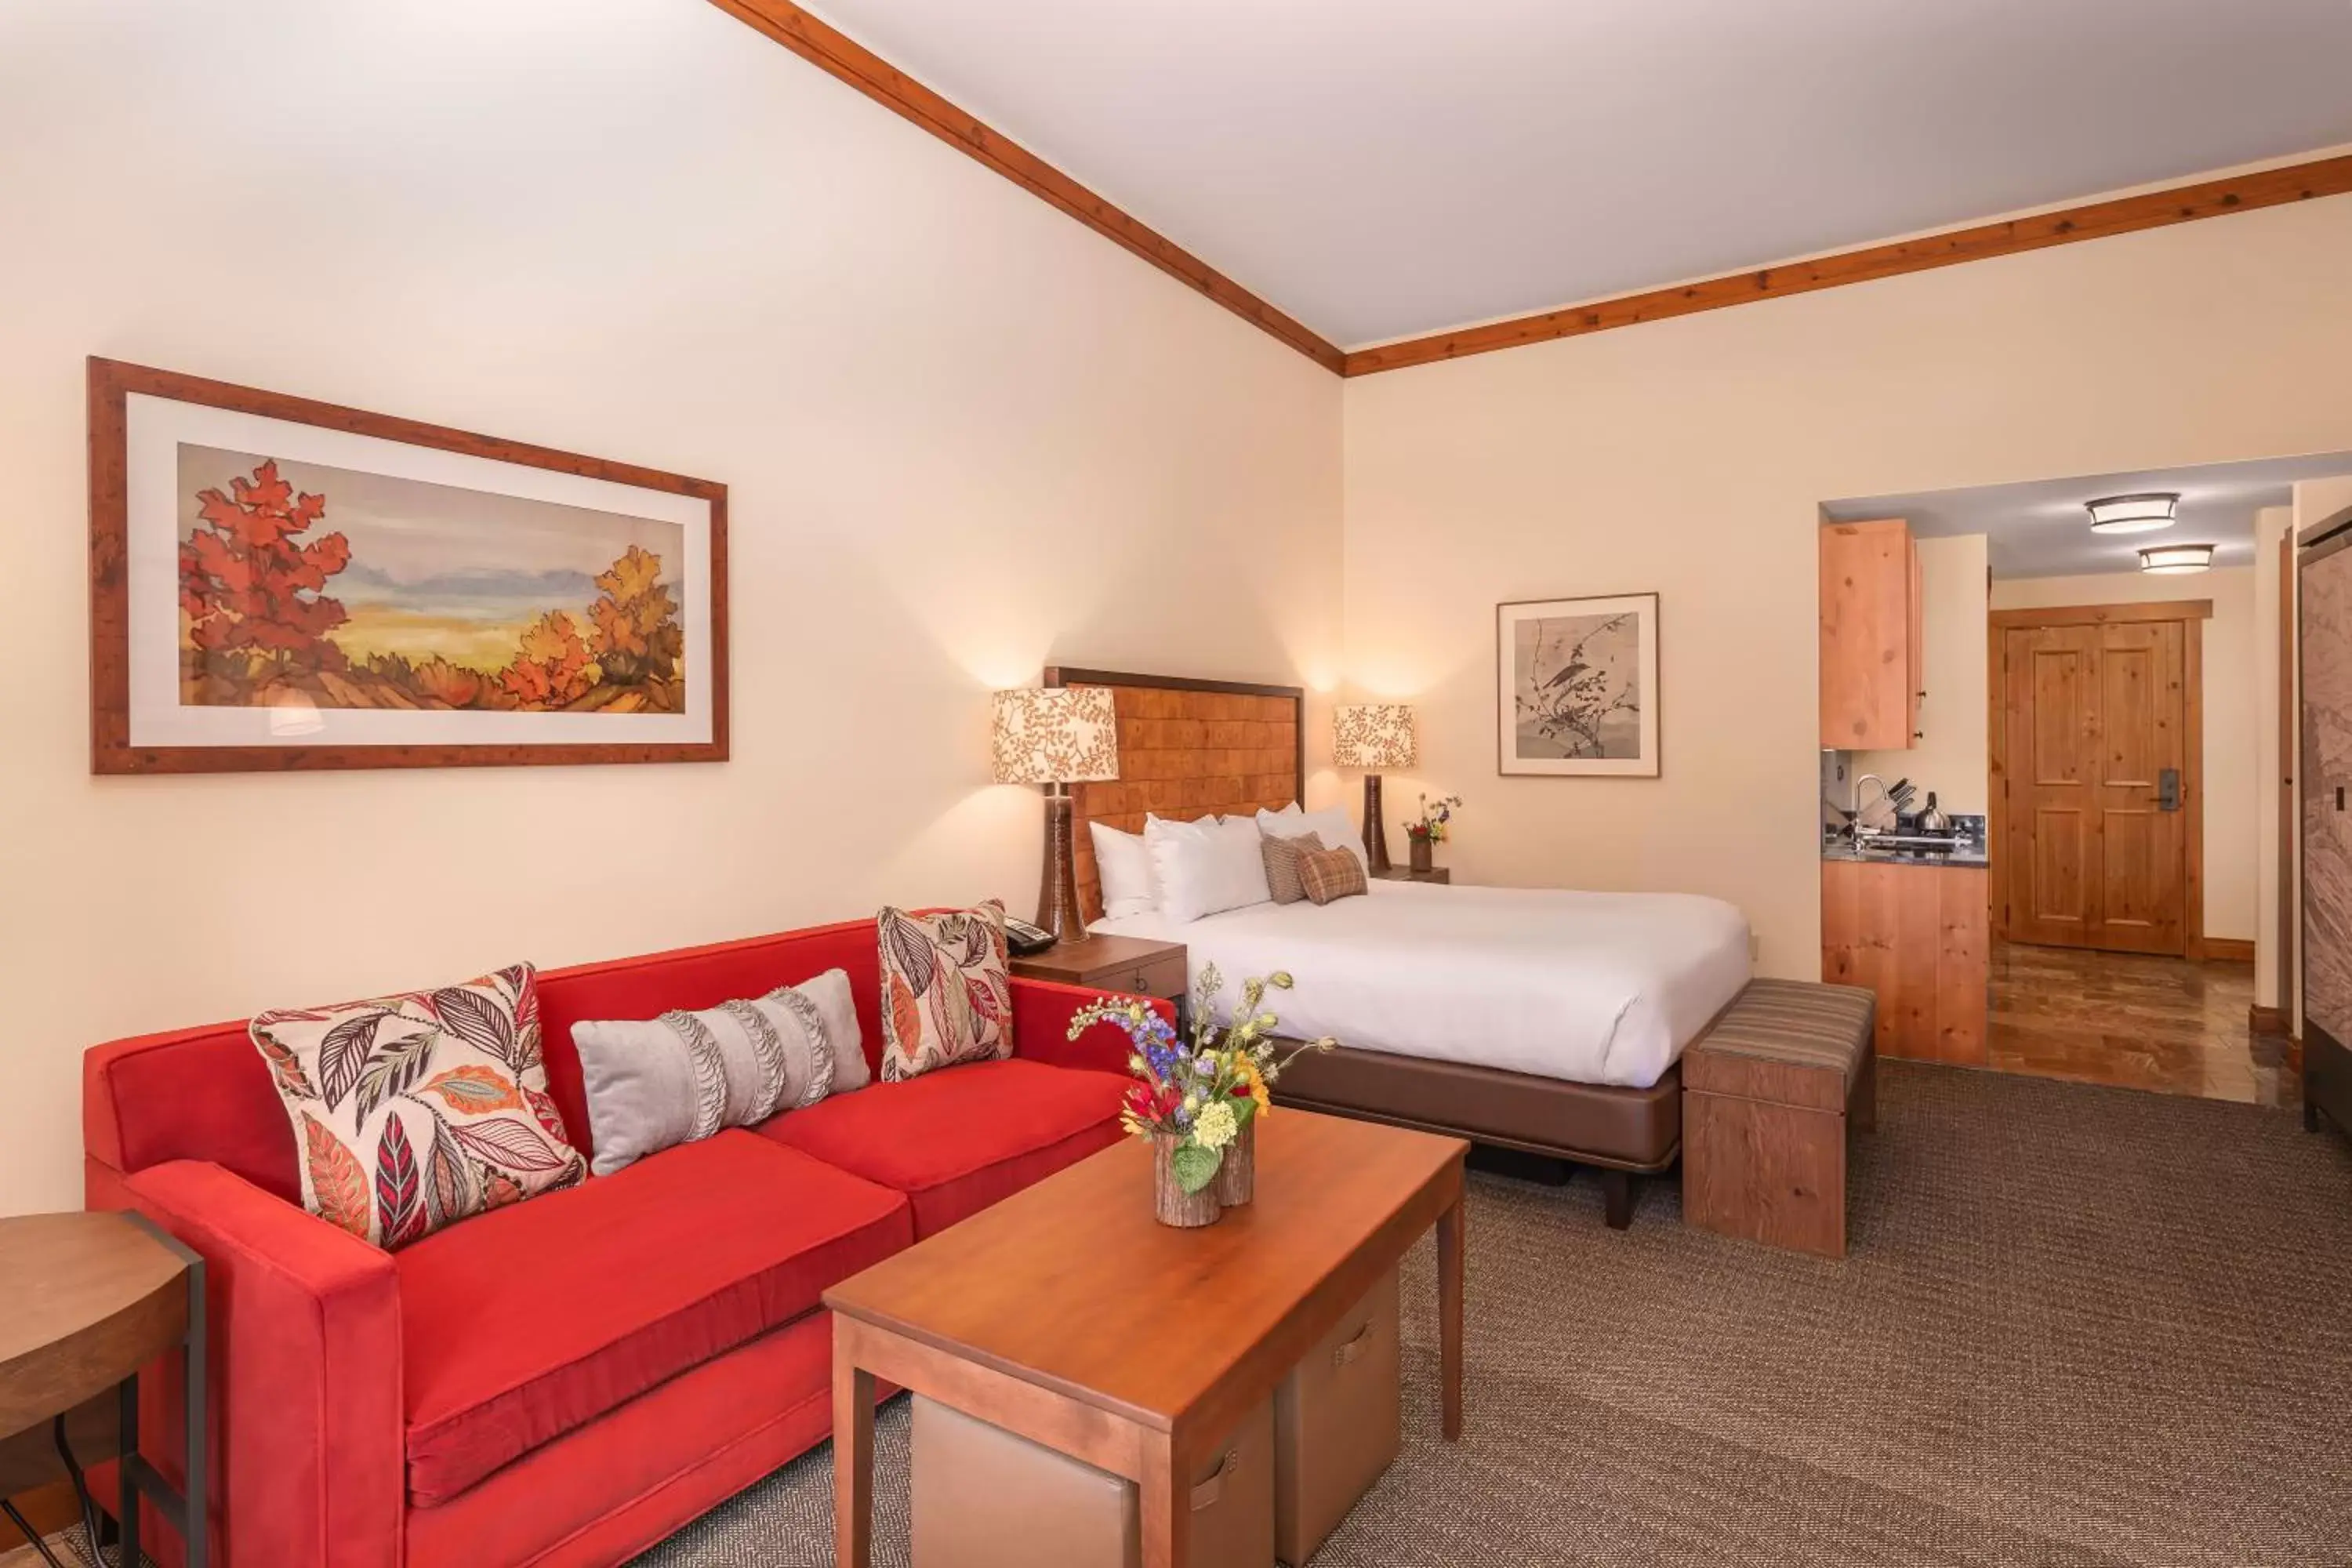 Studio in The Lodge at Spruce Peak, a Destination by Hyatt Residence